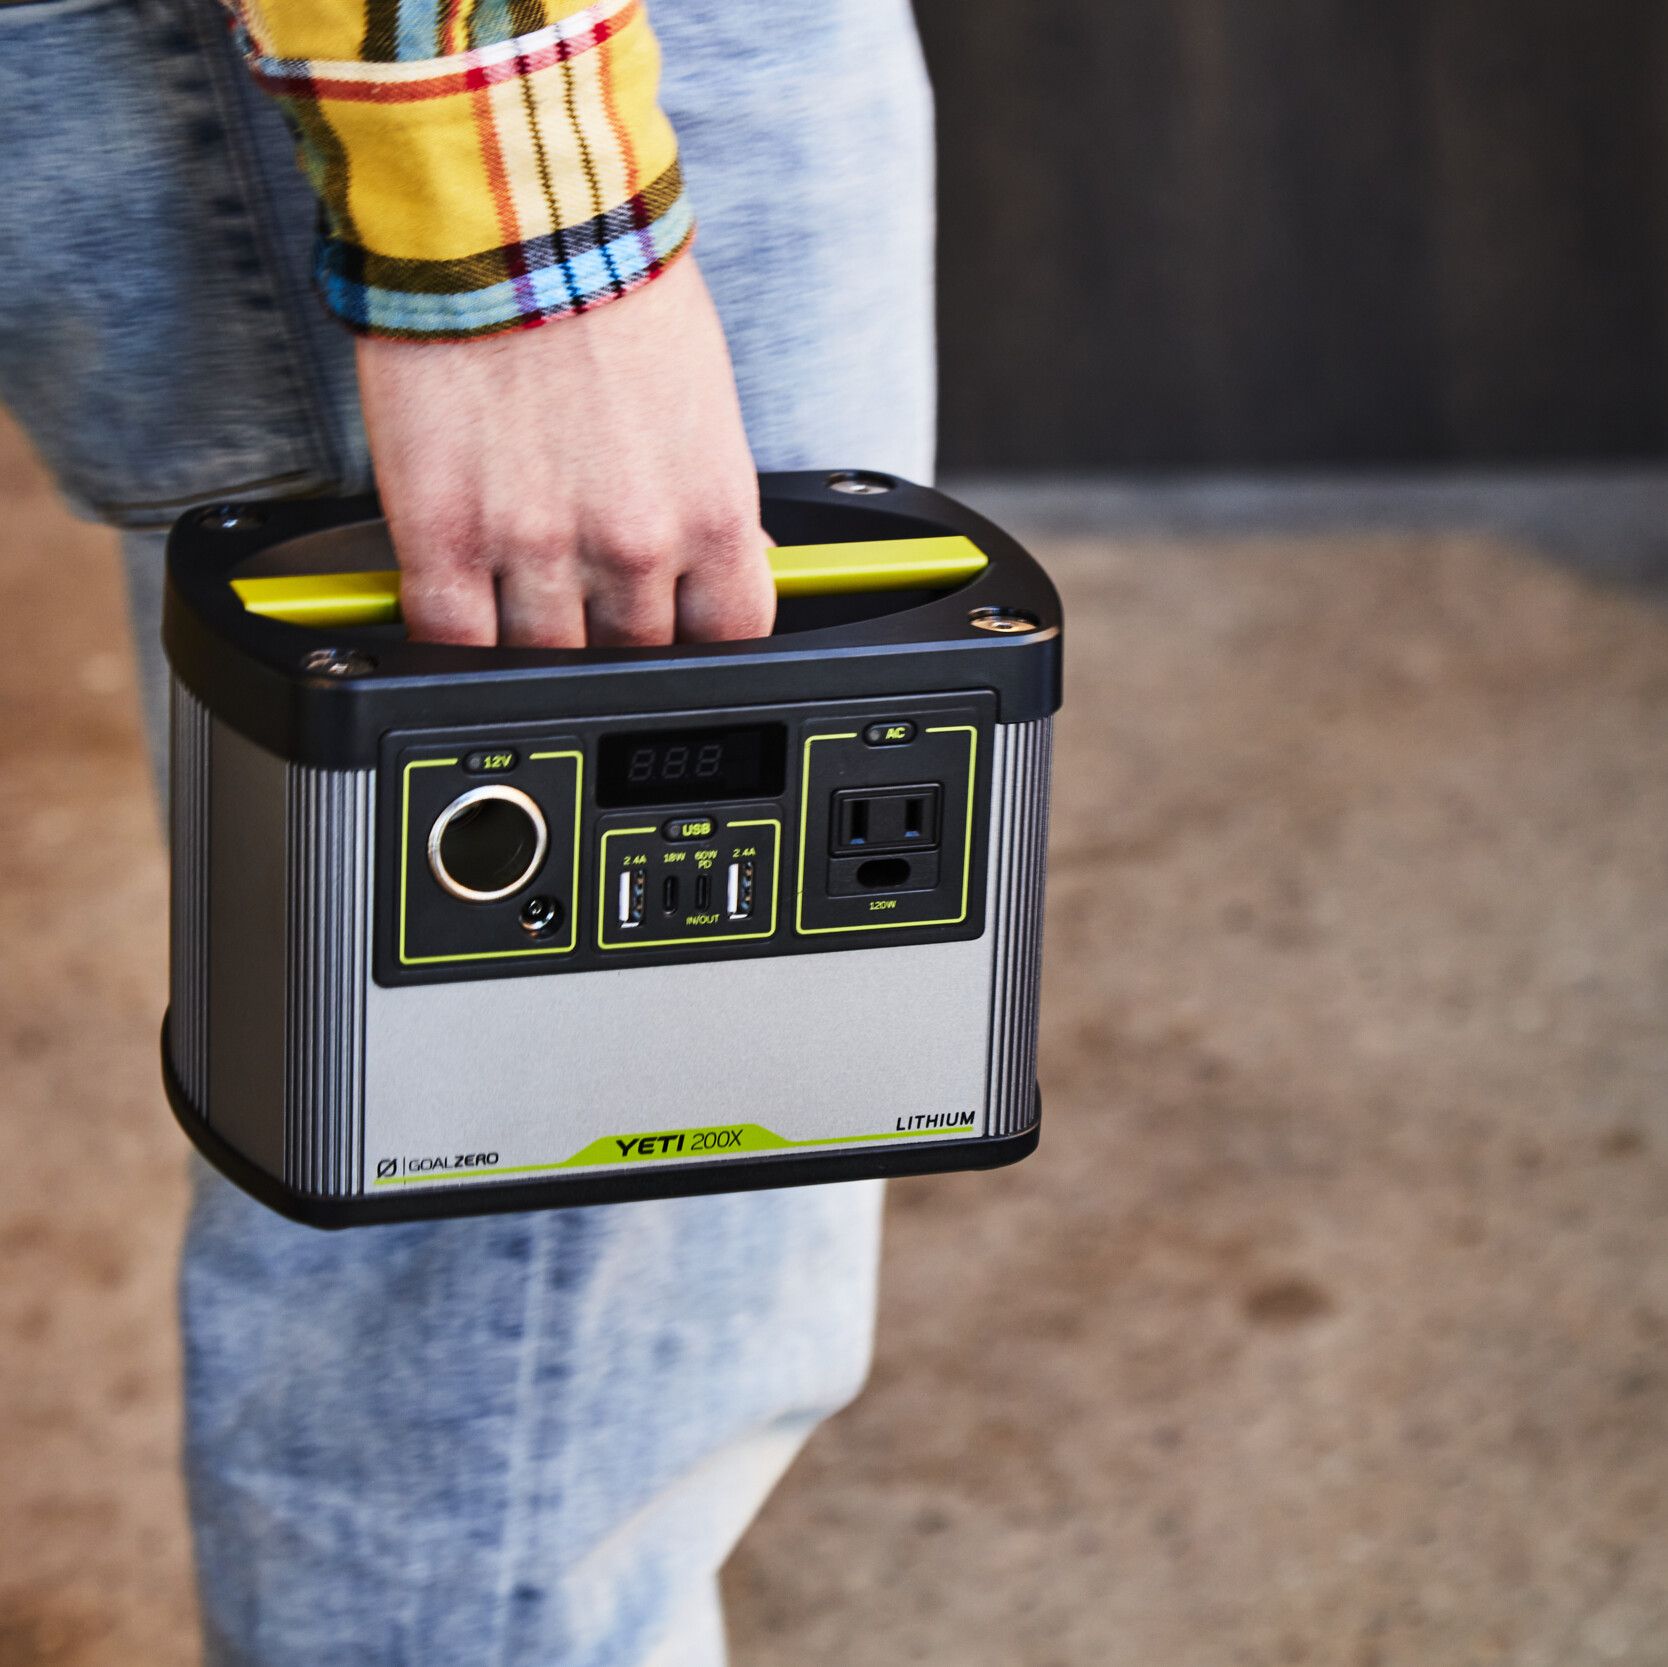 You Can Save Up to 47% on Portable Generators During Amazon's Big Spring Sale Event